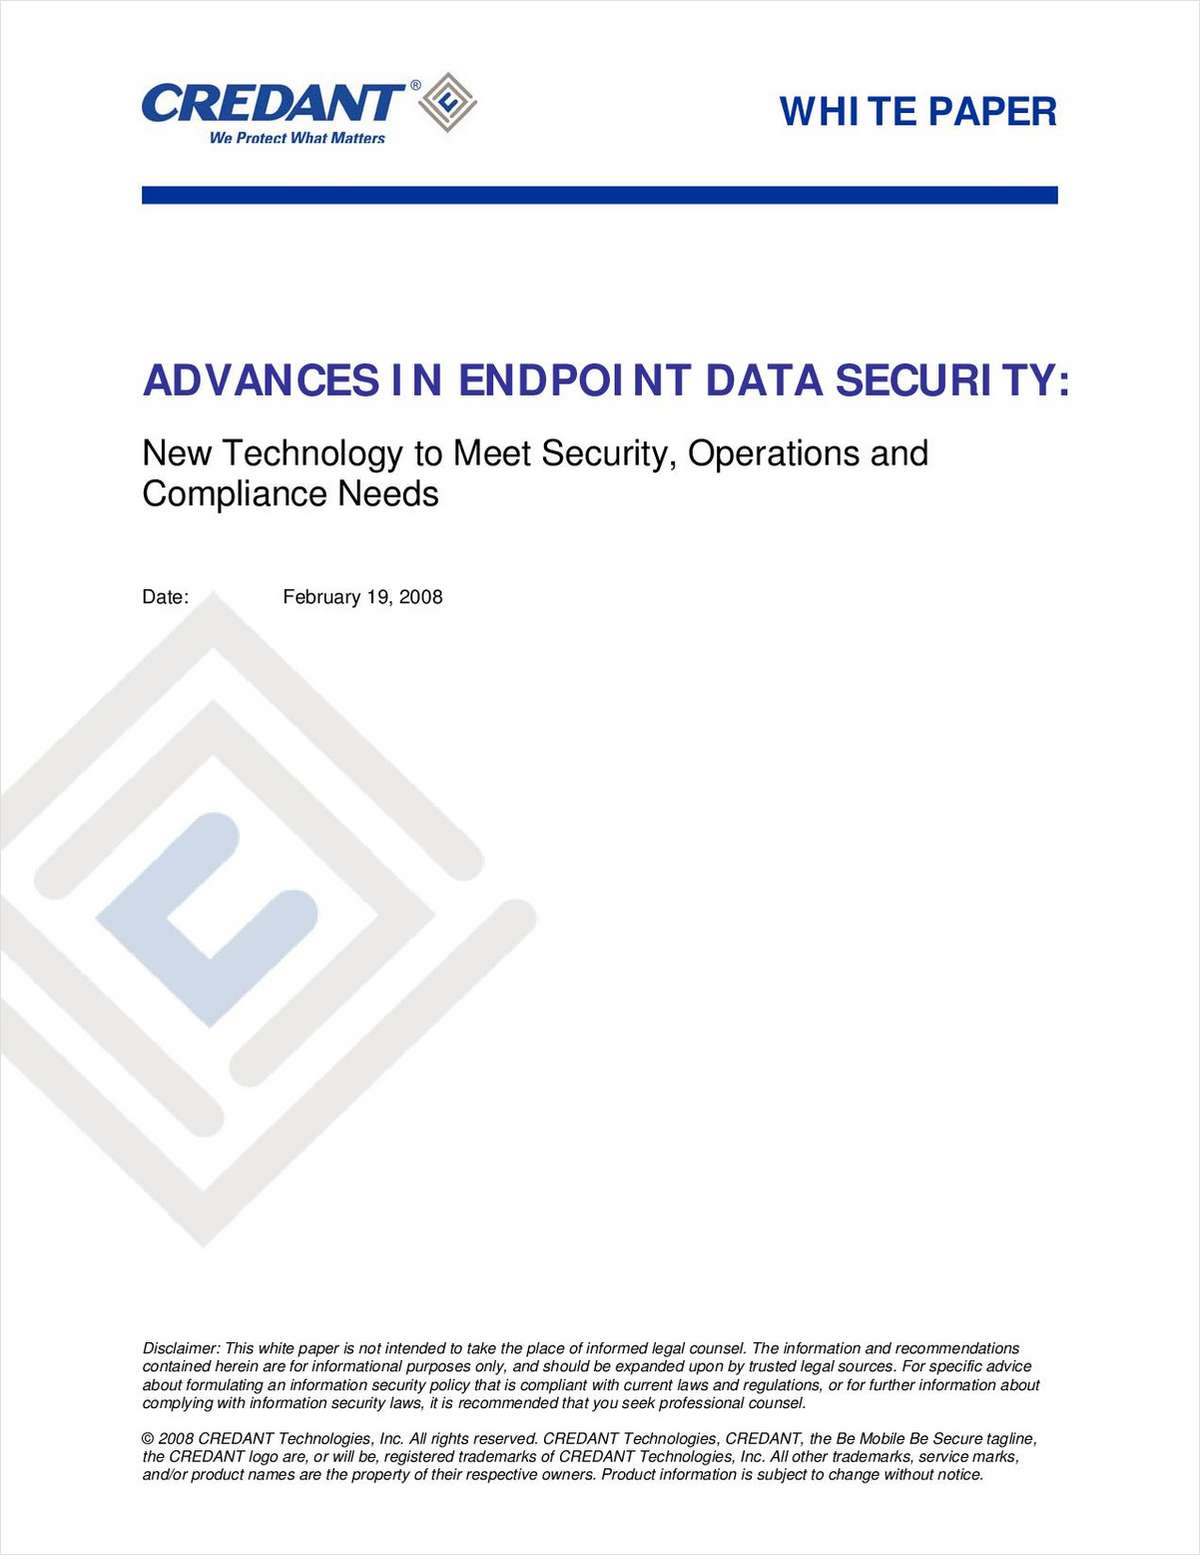 Advances in Endpoint Data Security: New Technology to Meet Security, Operations and Compliance Needs